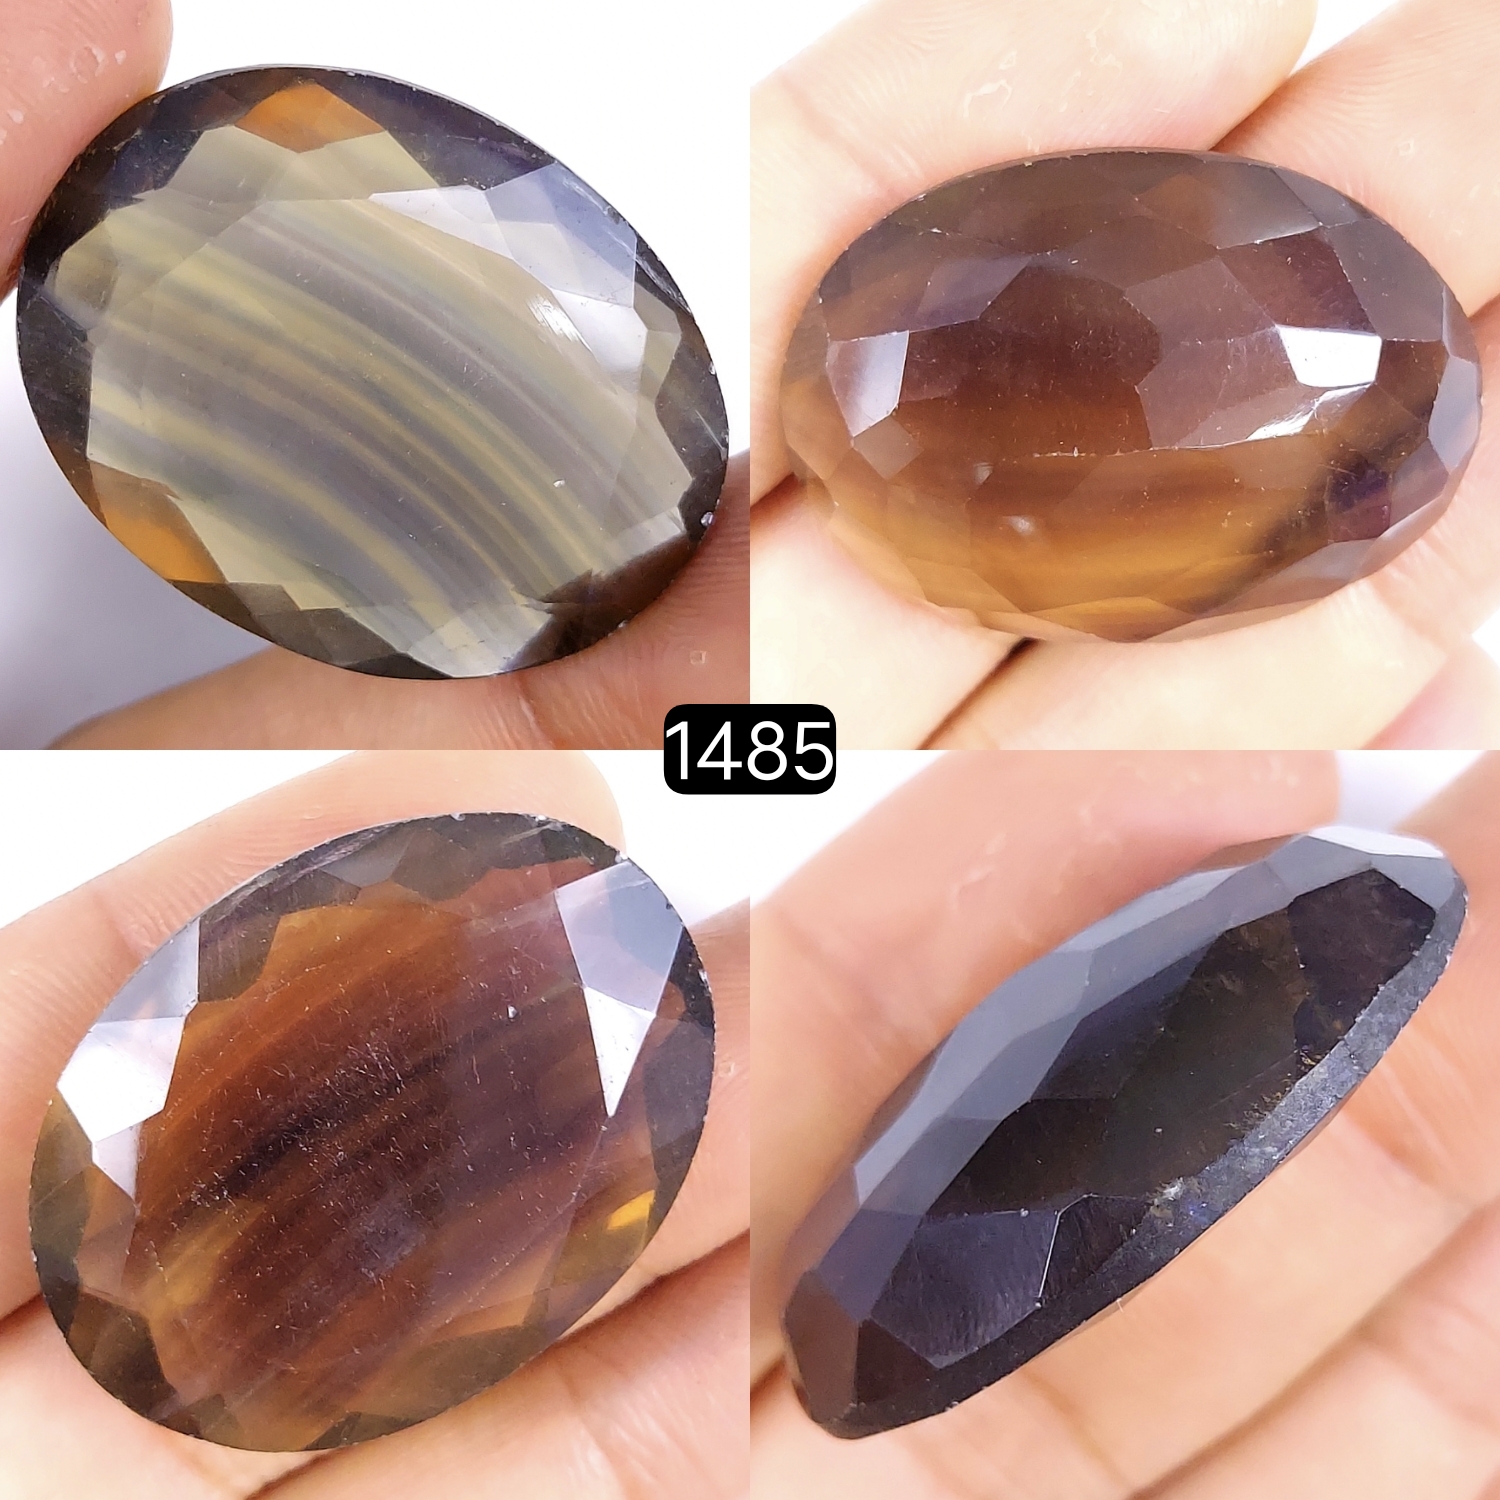 1Pc 98Cts Natural Multi Fluorite Faceted Cabochon Gemstone Oval Shape Crystal 38x28mm#1485